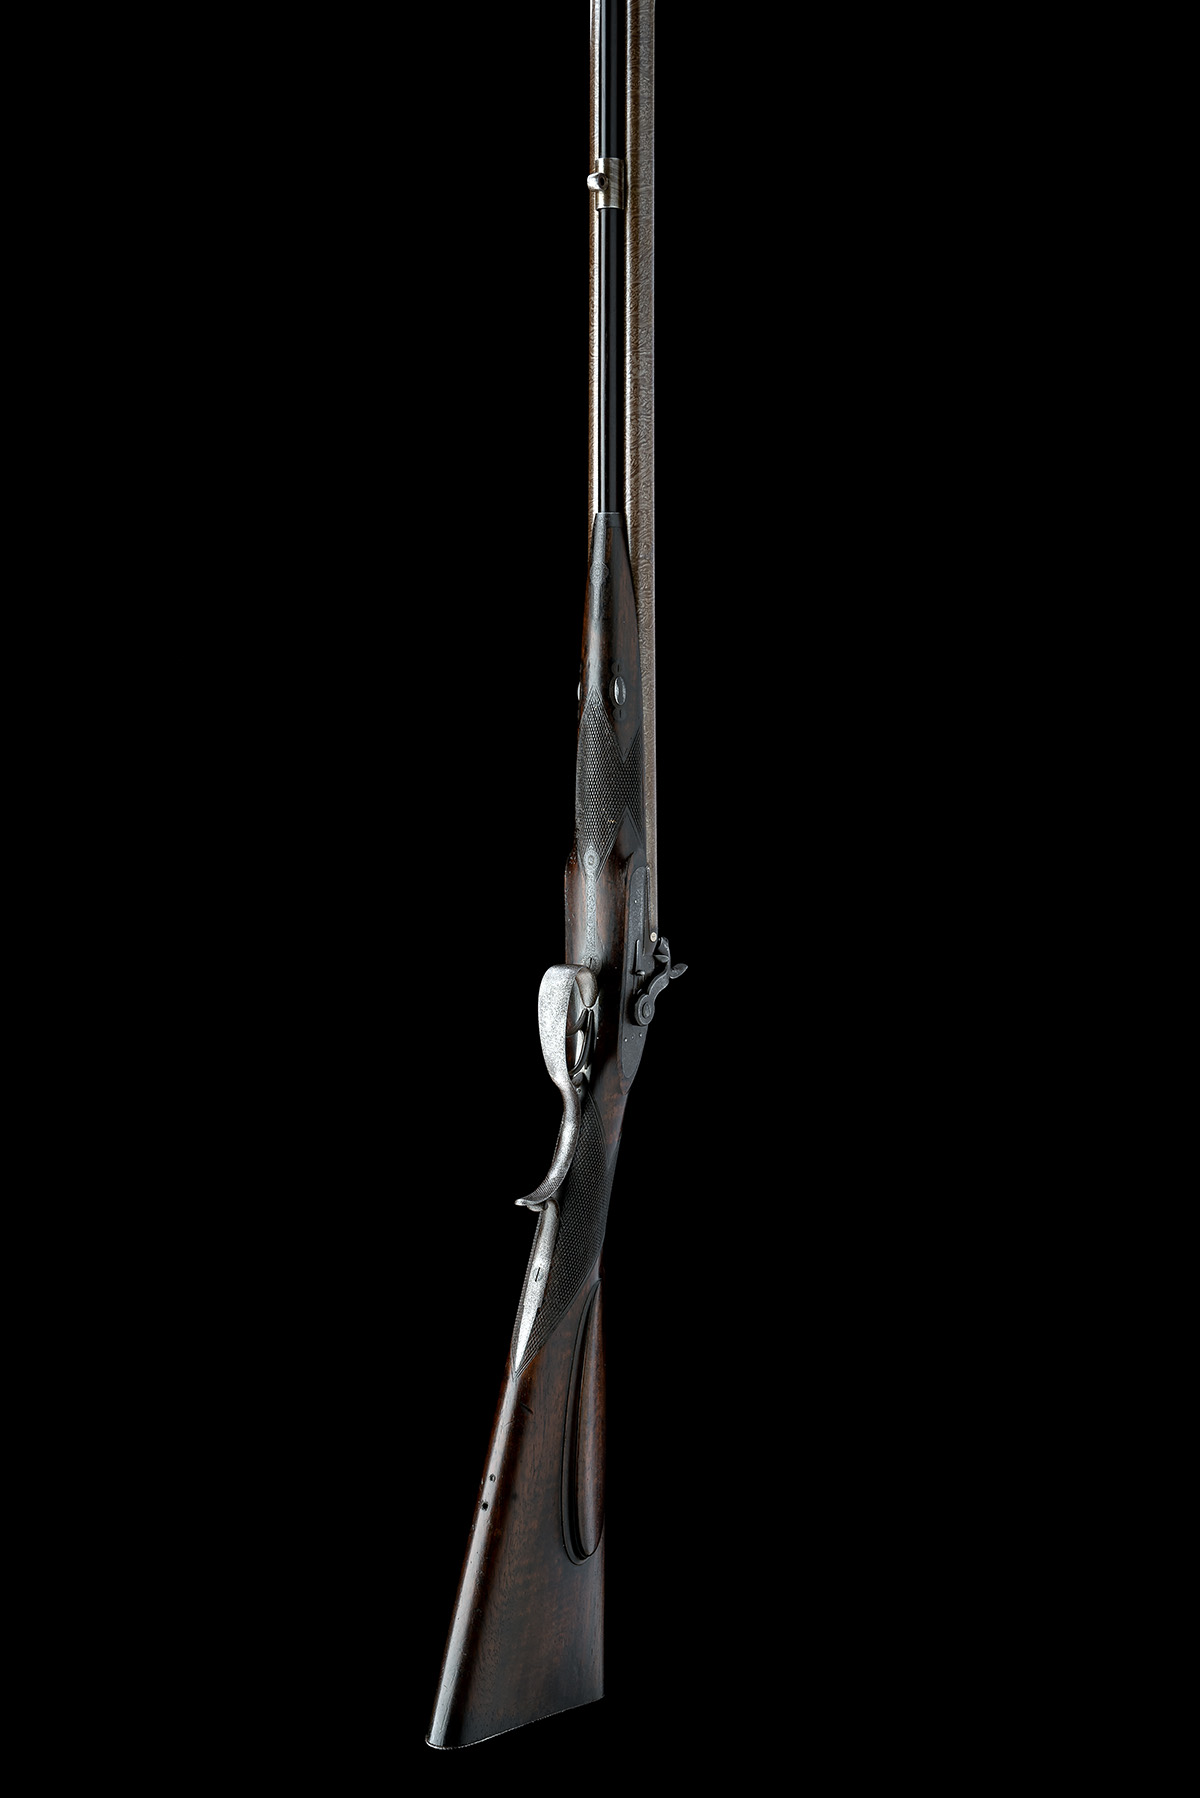 A CASED 32-BORE TWO-GROOVE PERCUSSION DOUBLE RIFLE BY PURDEY, serial no. 4862, for 1853, with twin- - Image 8 of 10